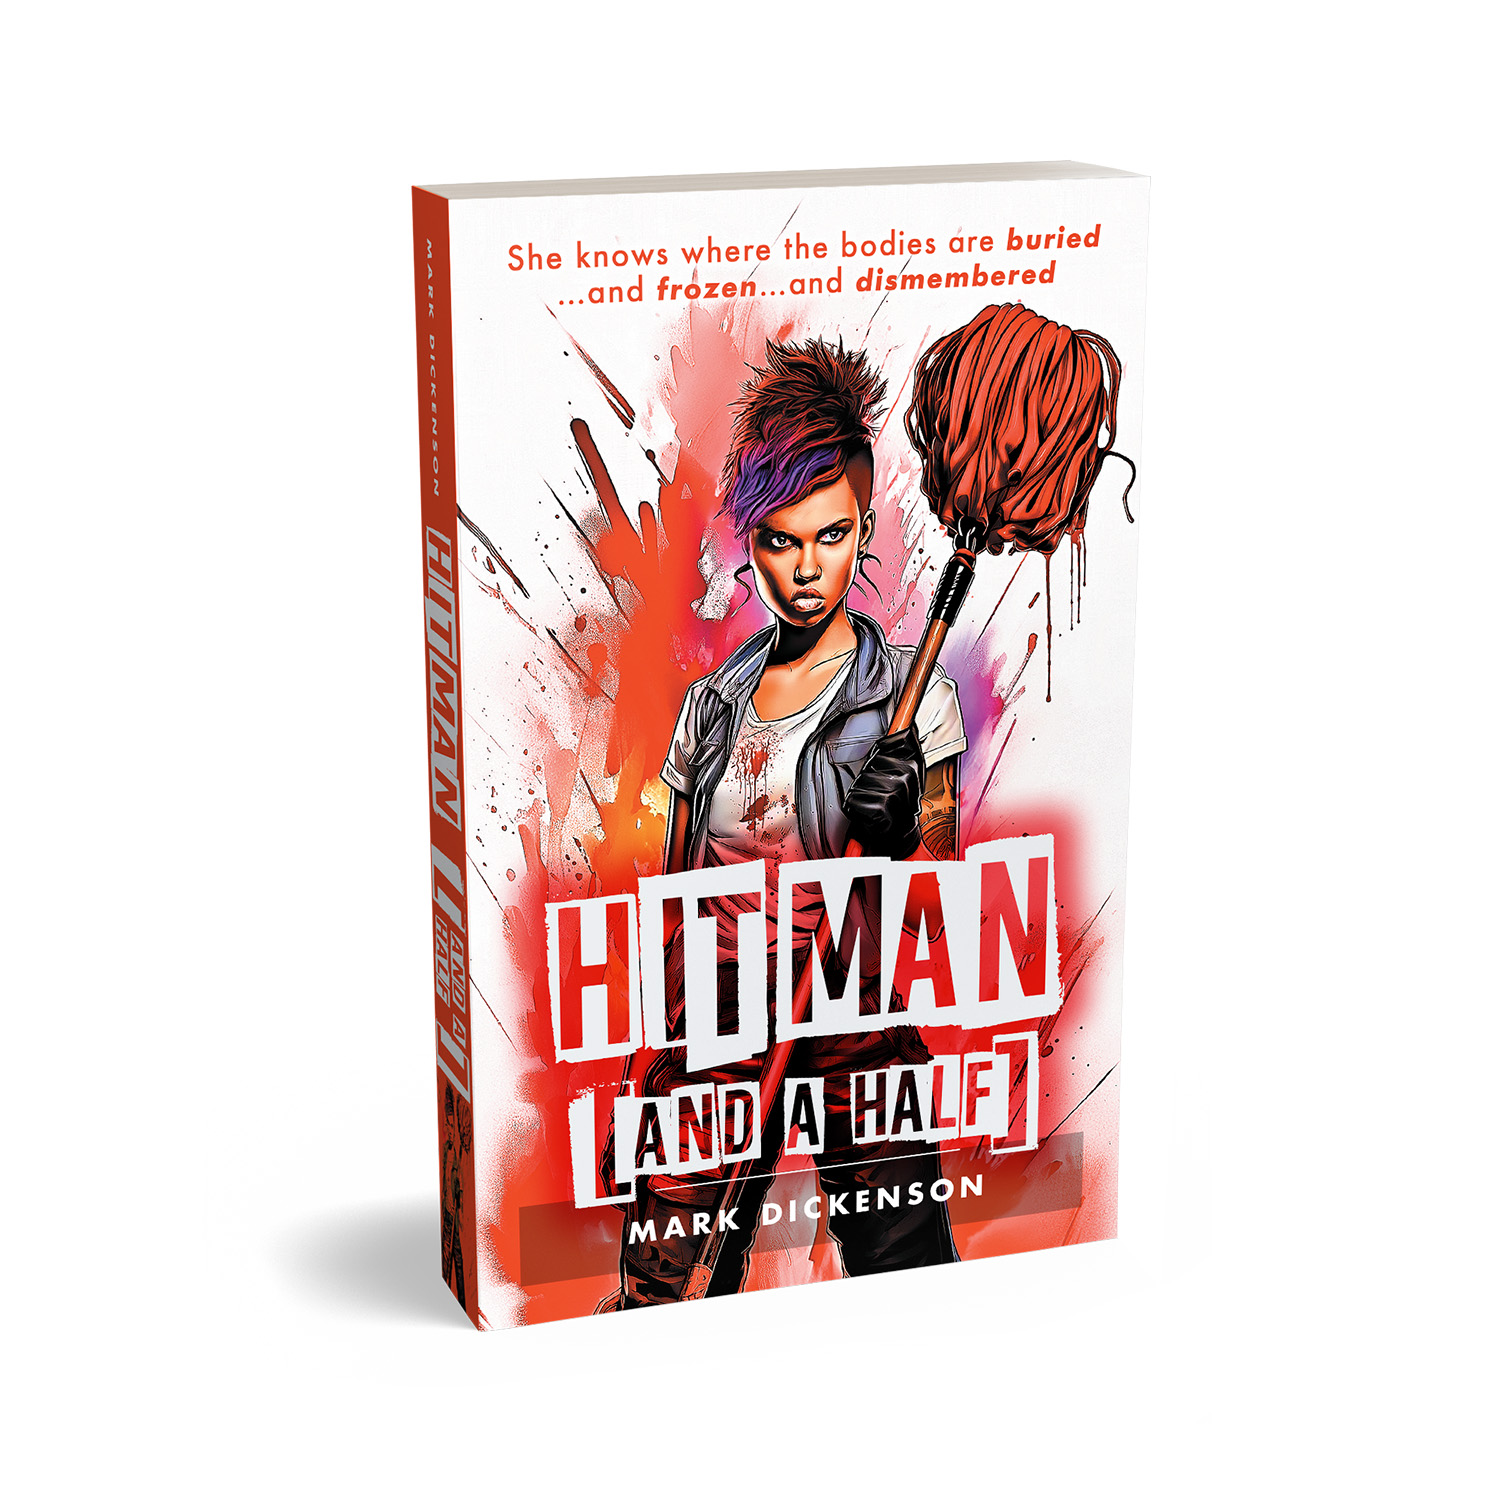 'Hitman [And a Half]' is ripping YA adventure novel by Mark Dickenson. The book cover and interior formatting were designed by Mark Thomas of coverness.com. To find out more about my book design services, please visit www.coverness.com